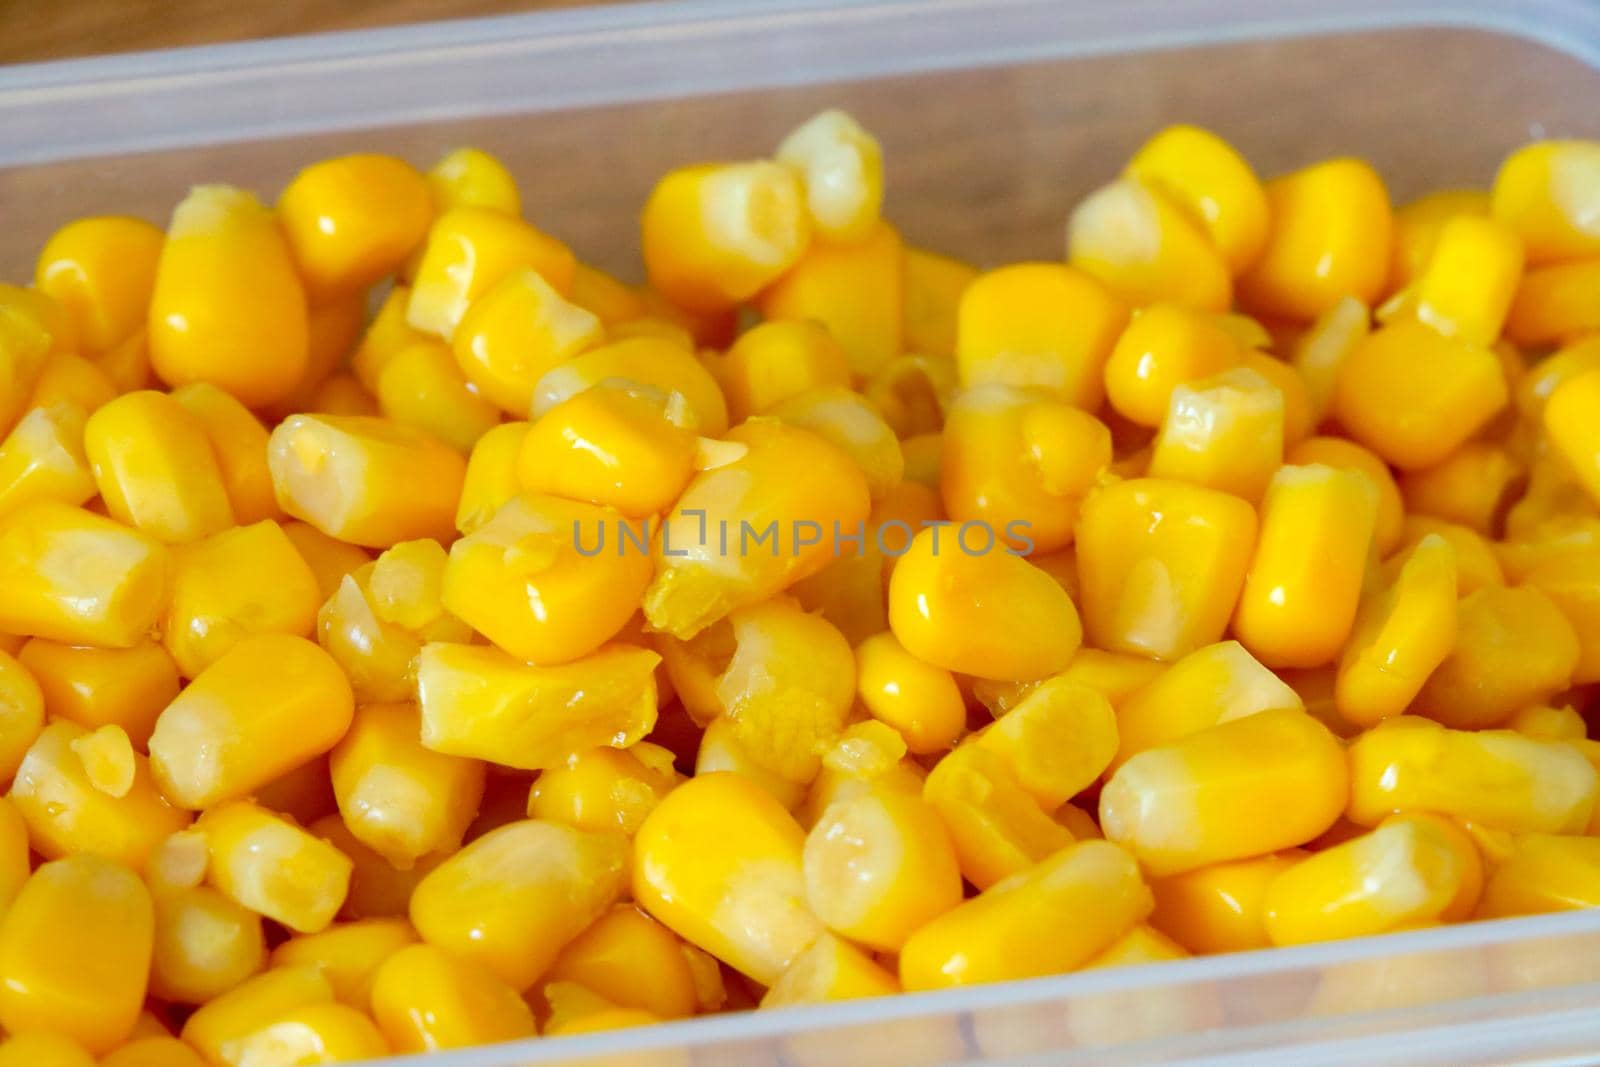 The container contains yellow tasty and sweet corn. by kip02kas